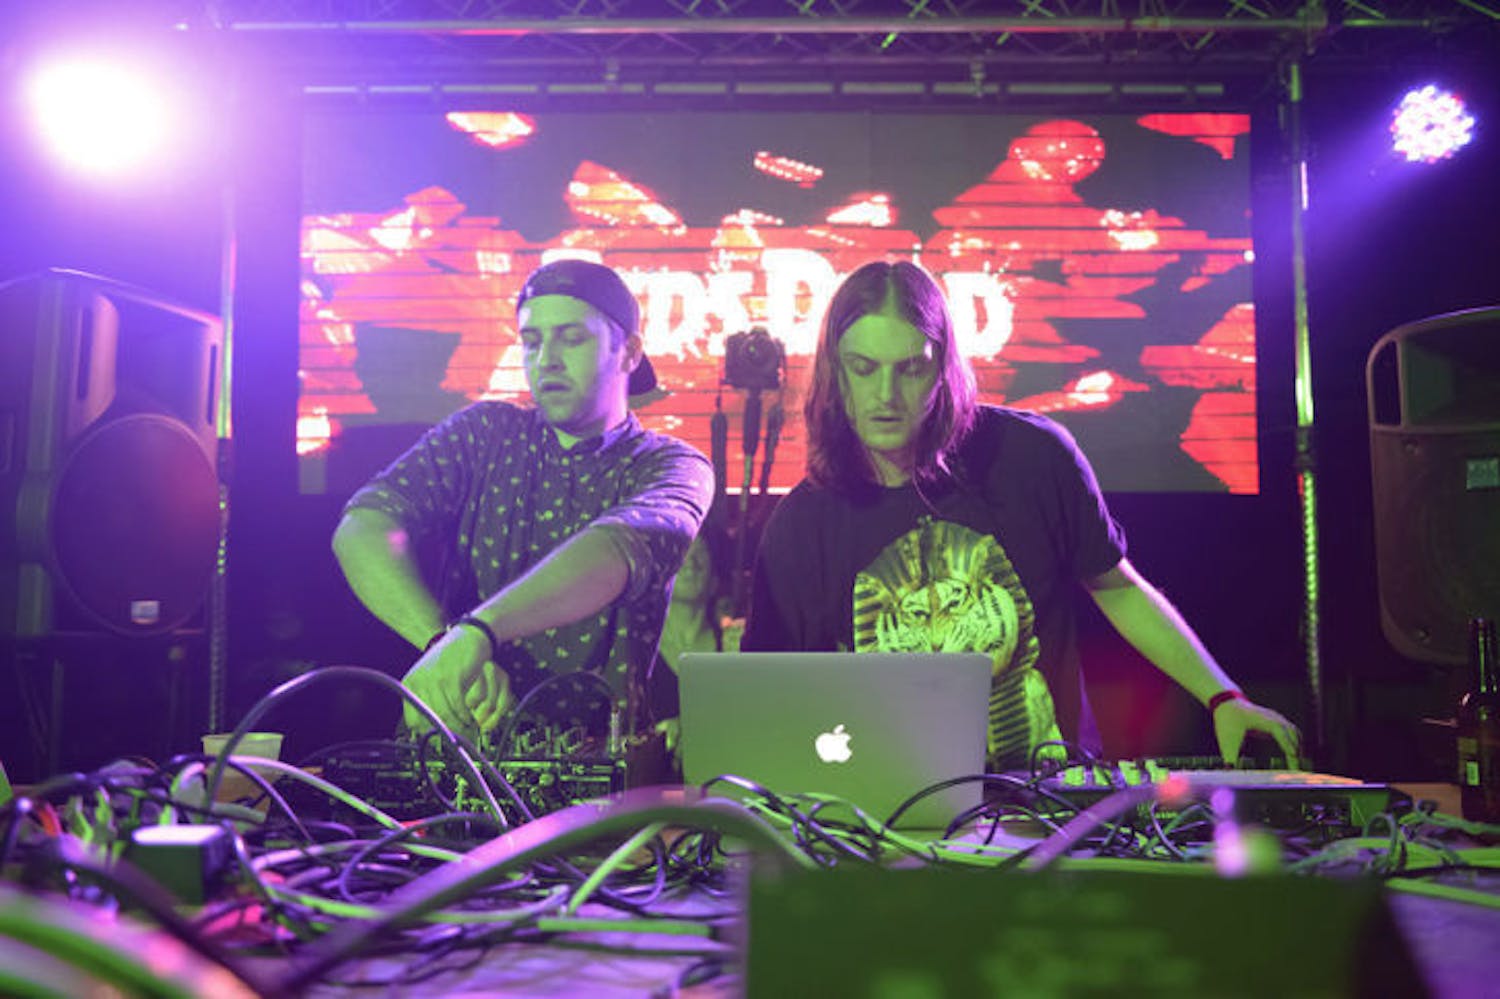 Canadian electronic music duo Zeds Dead performs Sept. 1 at Forum. The electronic dance music industry is under fire after the multi-day Electric Zoo Festival was shut down following two suspected drug overdoses that same day.